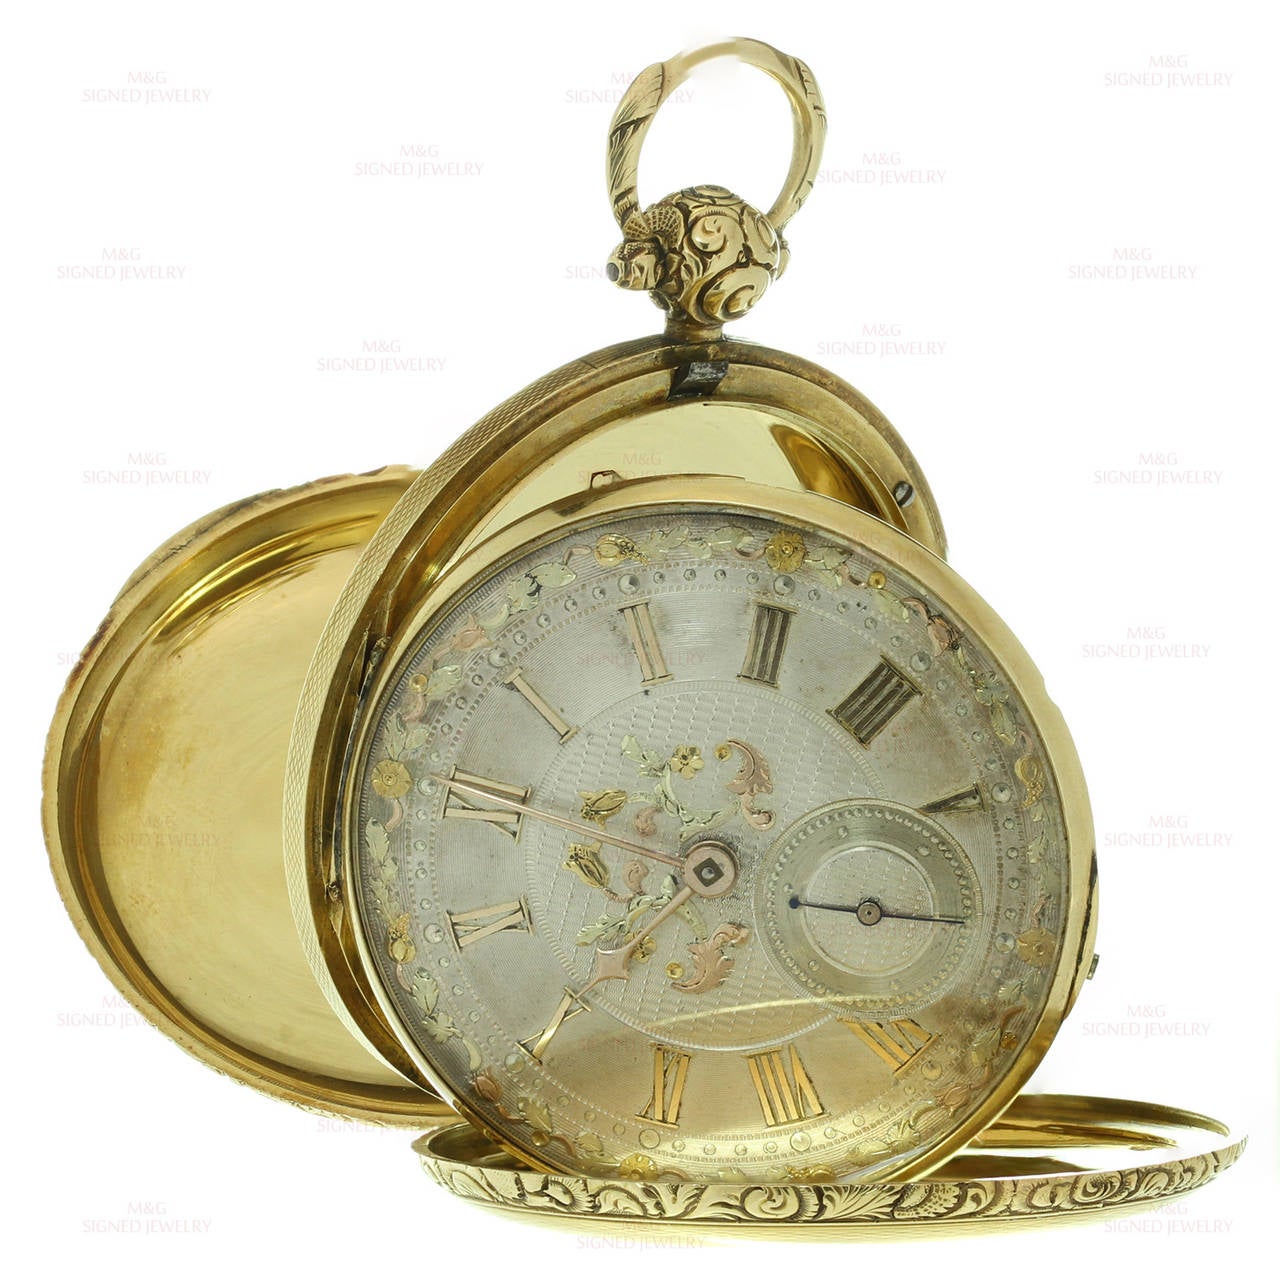 This stunning Victorian pocket watch is made in 18k yellow gold and features elegant hand-crafted filigree work on the case and gorgeous hand-made multi-color gold applications on the dial. Made in United Kingdom circa 1890s by an unknown maker.